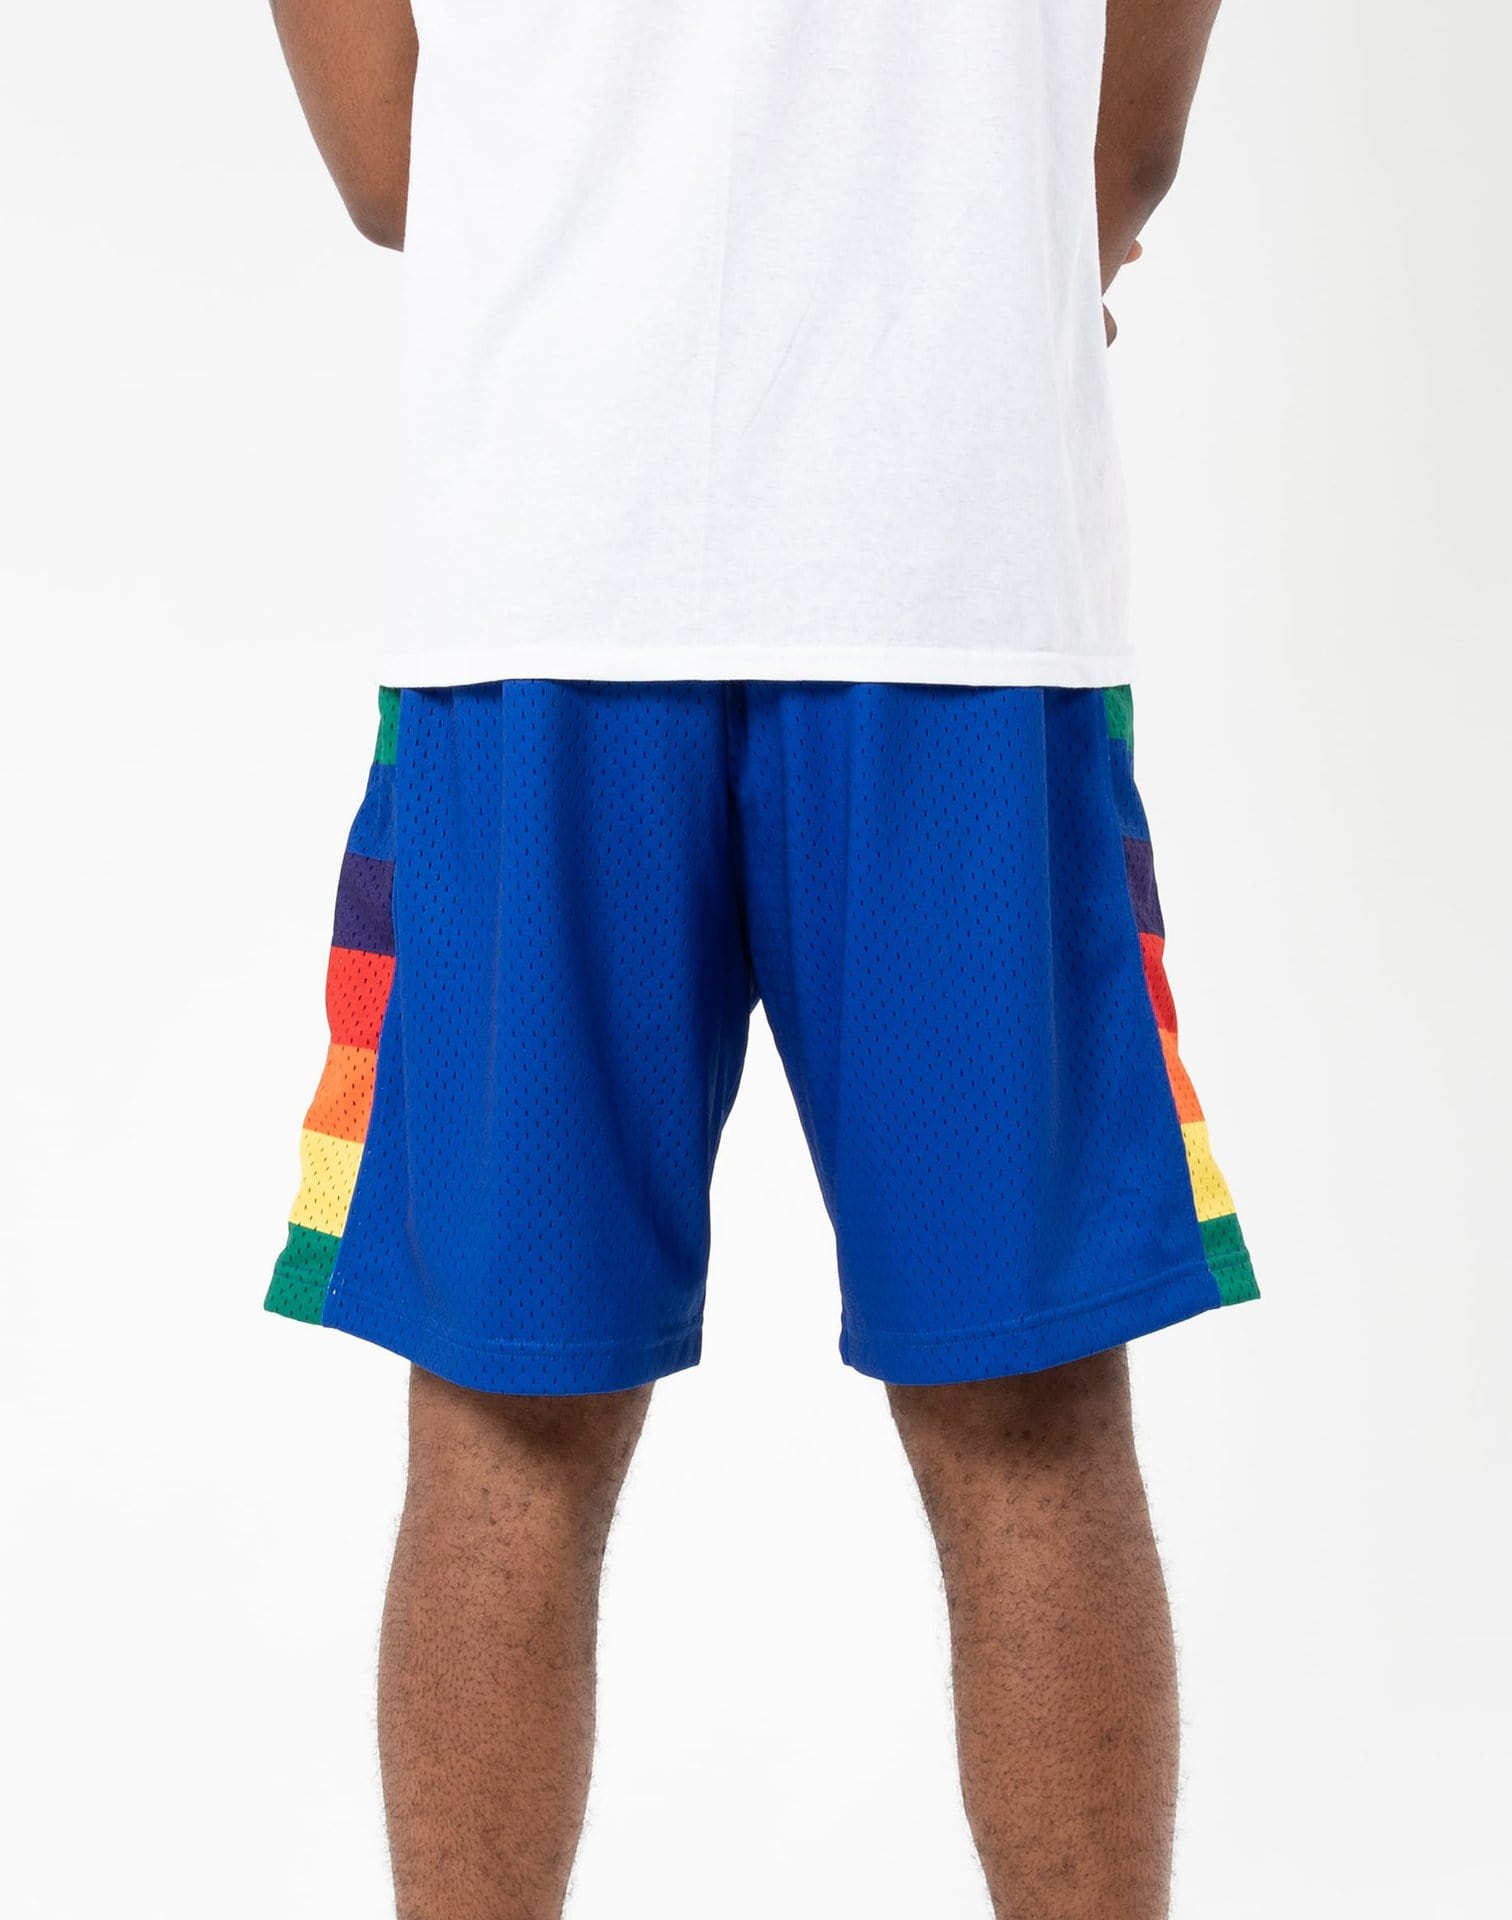 8:24 Swingman Mitchell & Ness Shorts 81 Points – K-Town Supply Co.